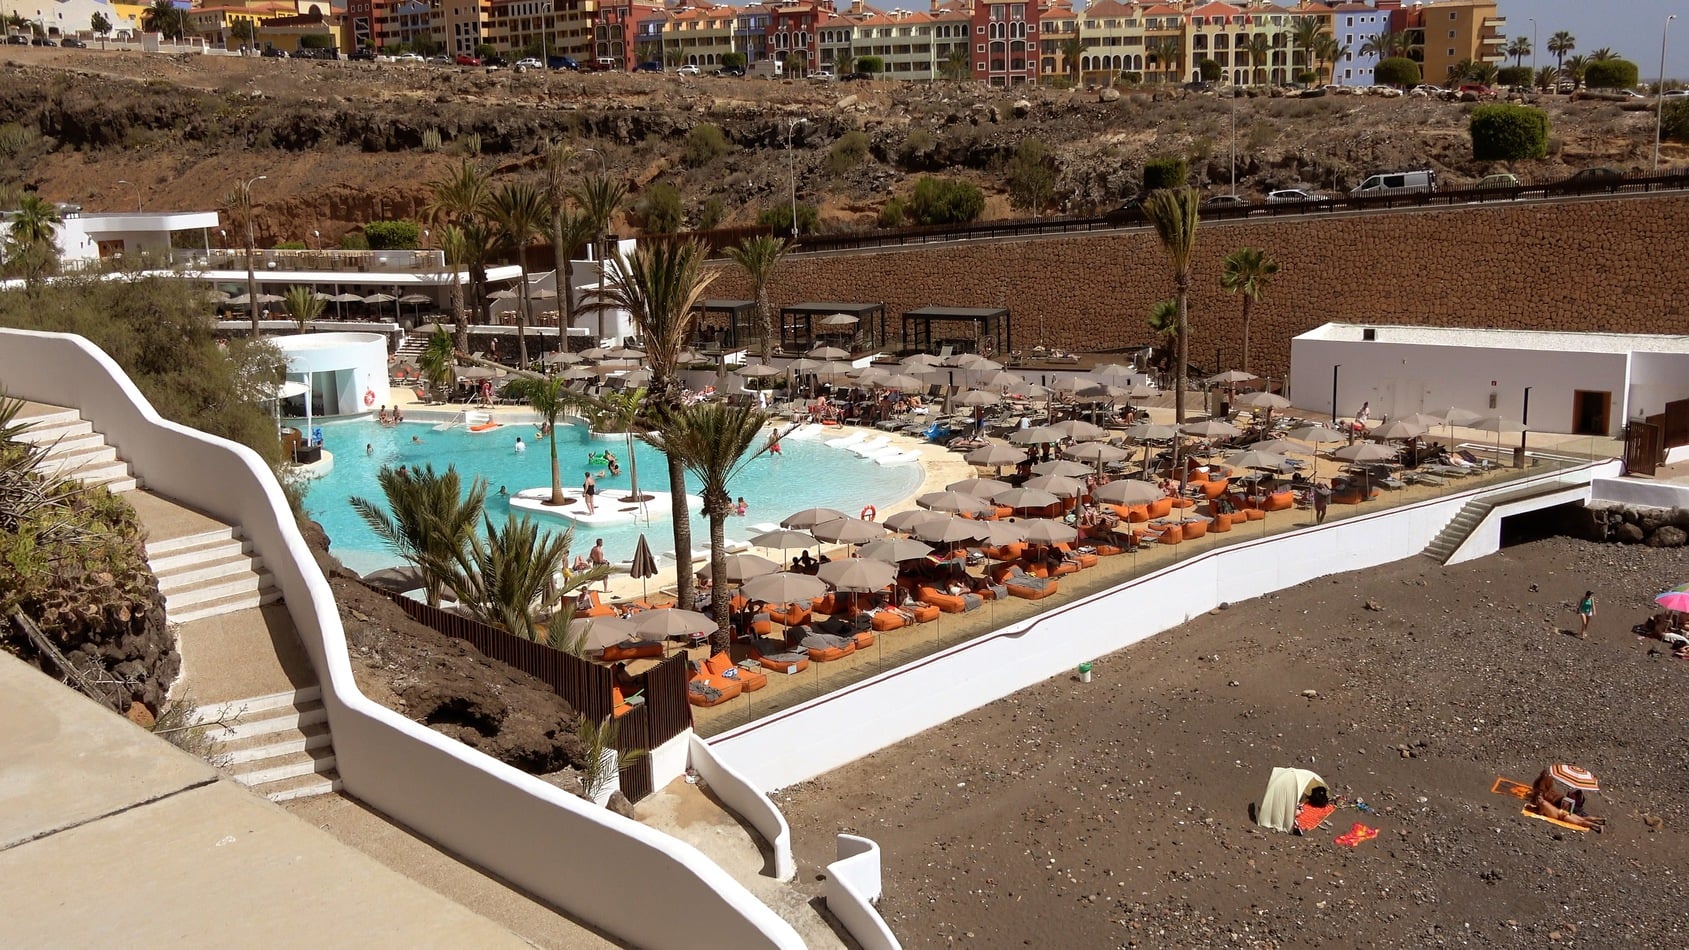 Playa Paraiso: Best destination for you in Tenerife? + holiday guide